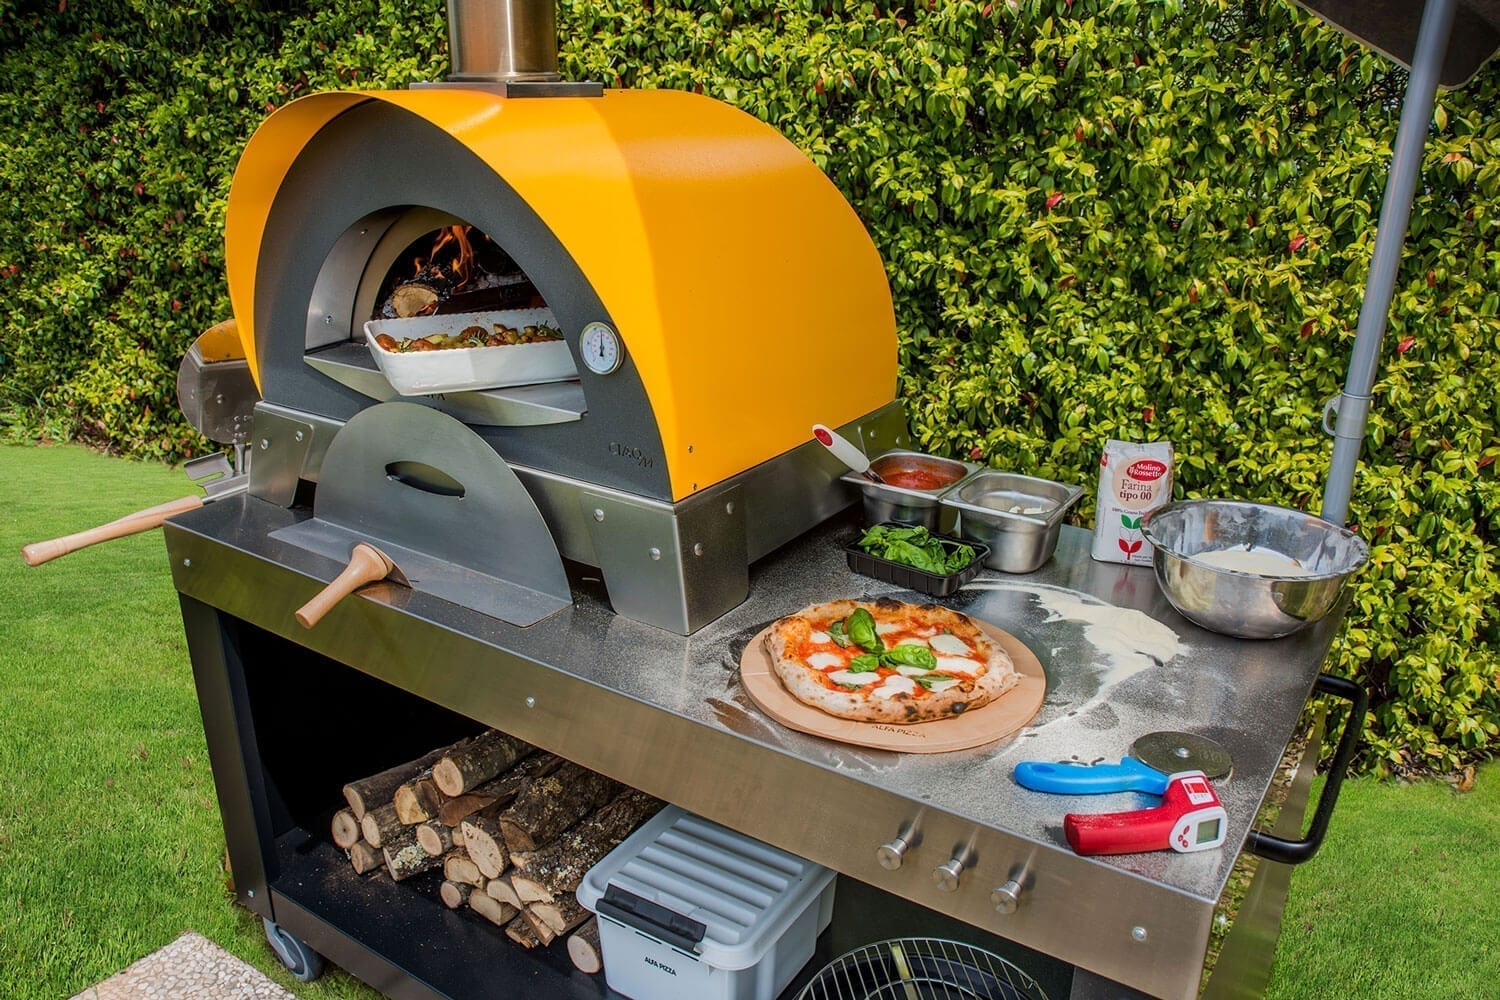 Wood-fired pizza ovens: 5 reasons to choose alfa for your home | Alfa Forni